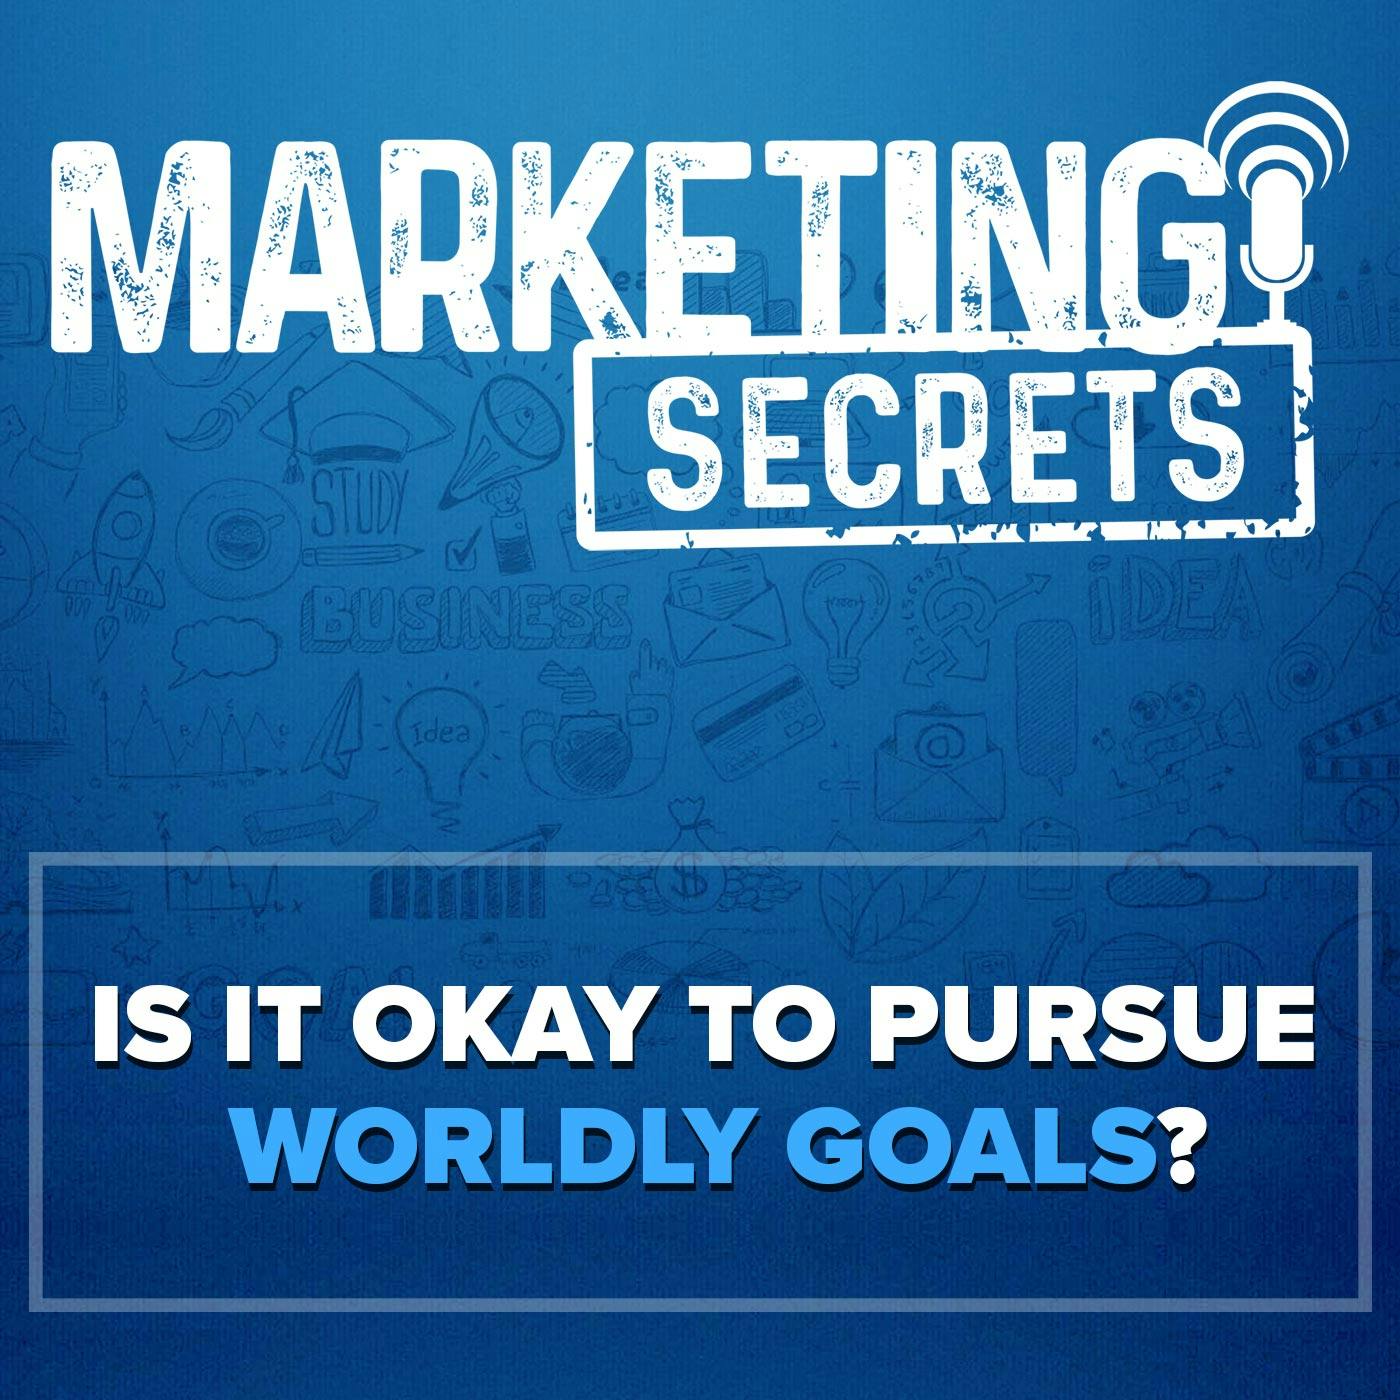 Is It Okay To Pursue Worldly Goals?